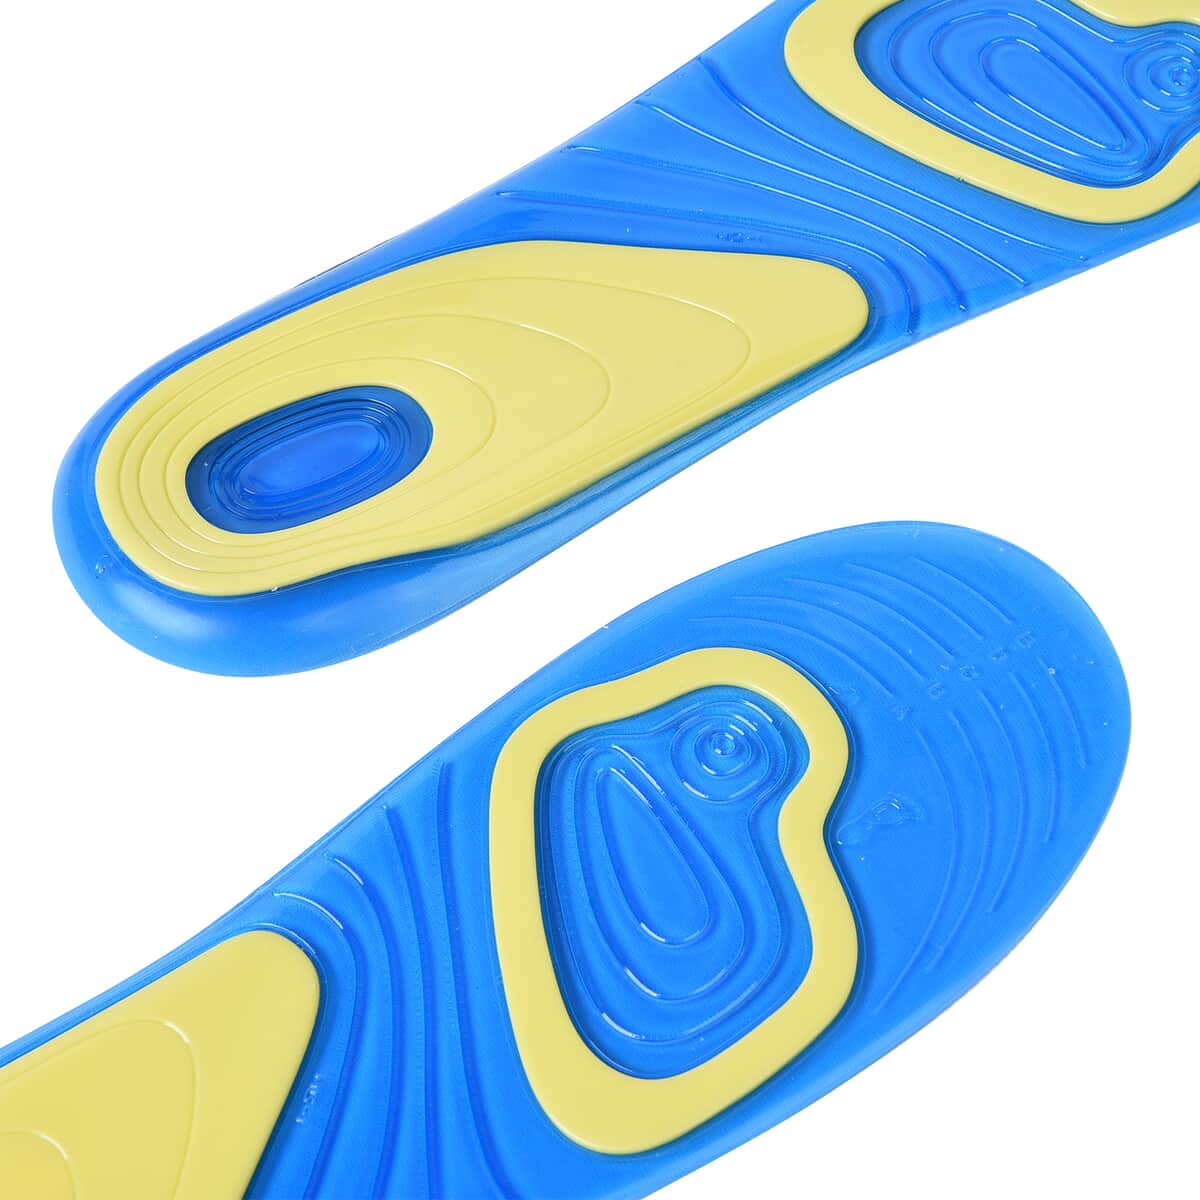 Anti Fatigue Athletic Running Work Shoe Gel Insoles for Men's - Blue & Yellow, Fits Mens Shoe Sizes 9 to 13 image number 2